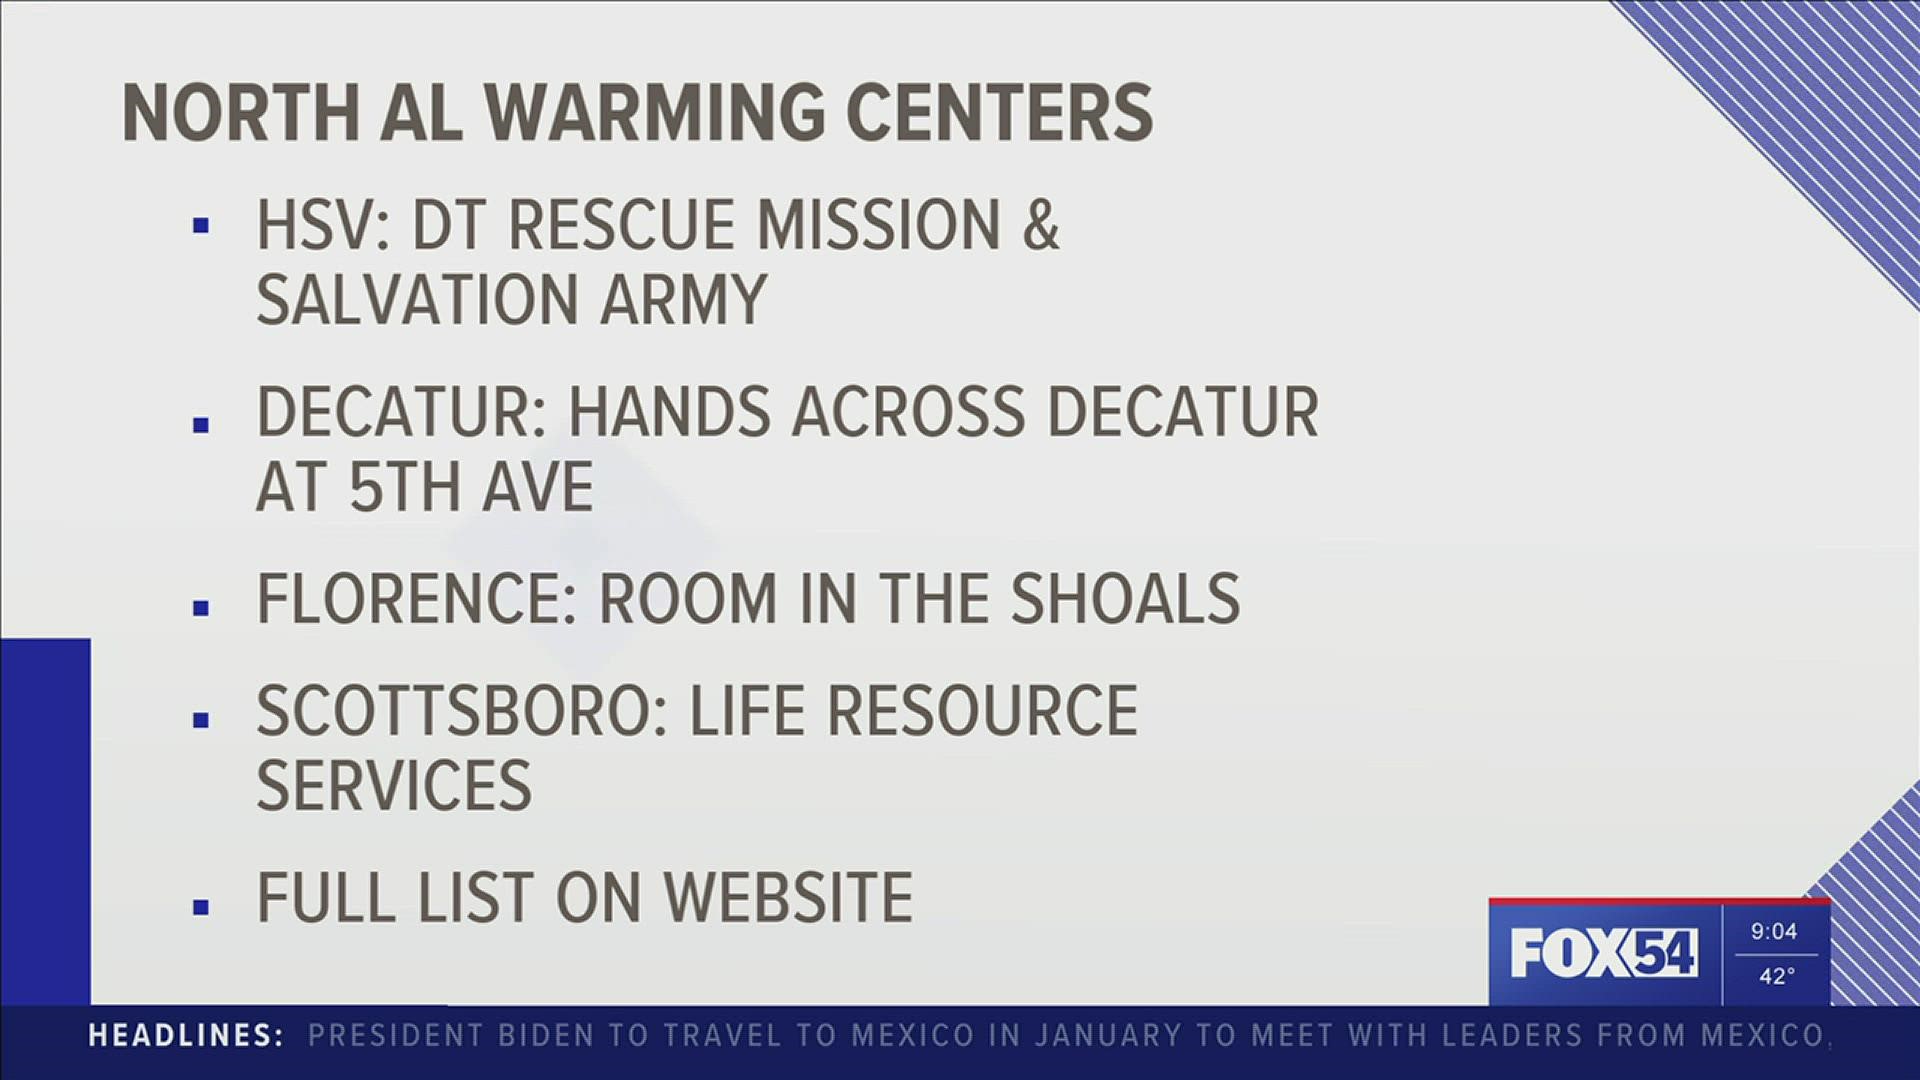 Multiple North Alabama organizations will open warming centers this week as the temperatures drastically drop. For a full list of warming centers, visit Fox54.com.